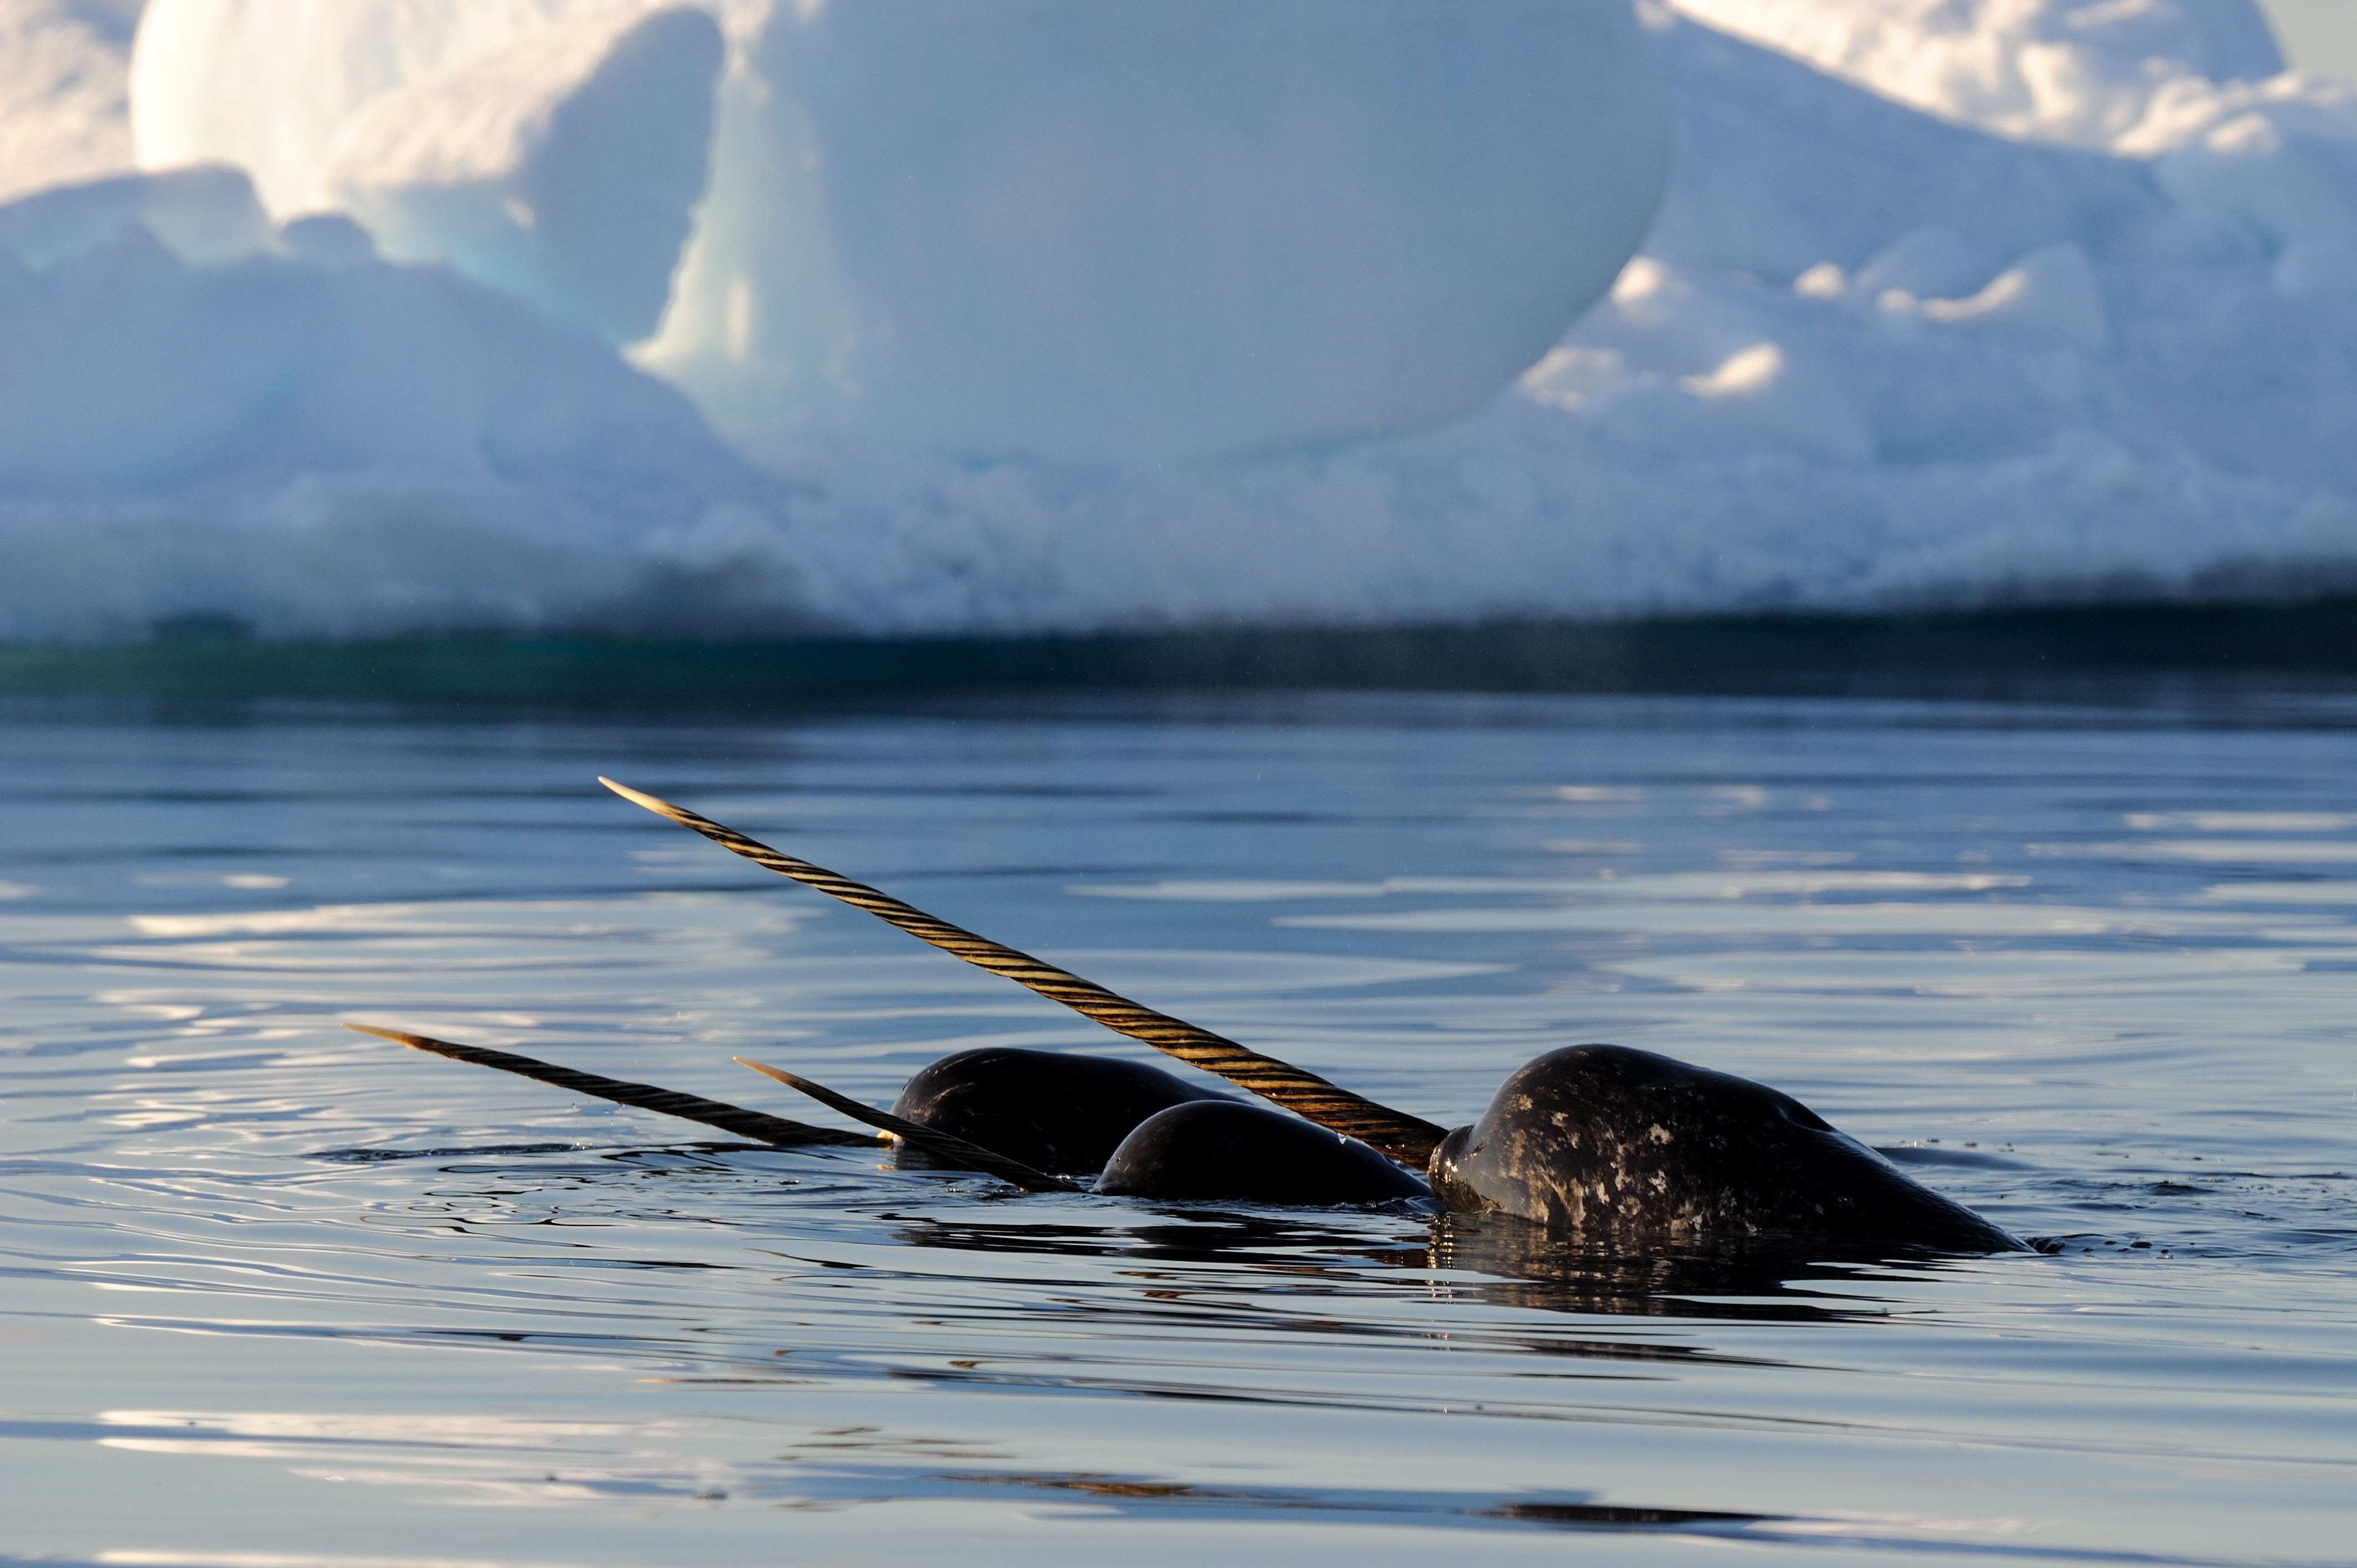 Narwhal Tusk Facts: Did You Know? | Arctic Kingdom